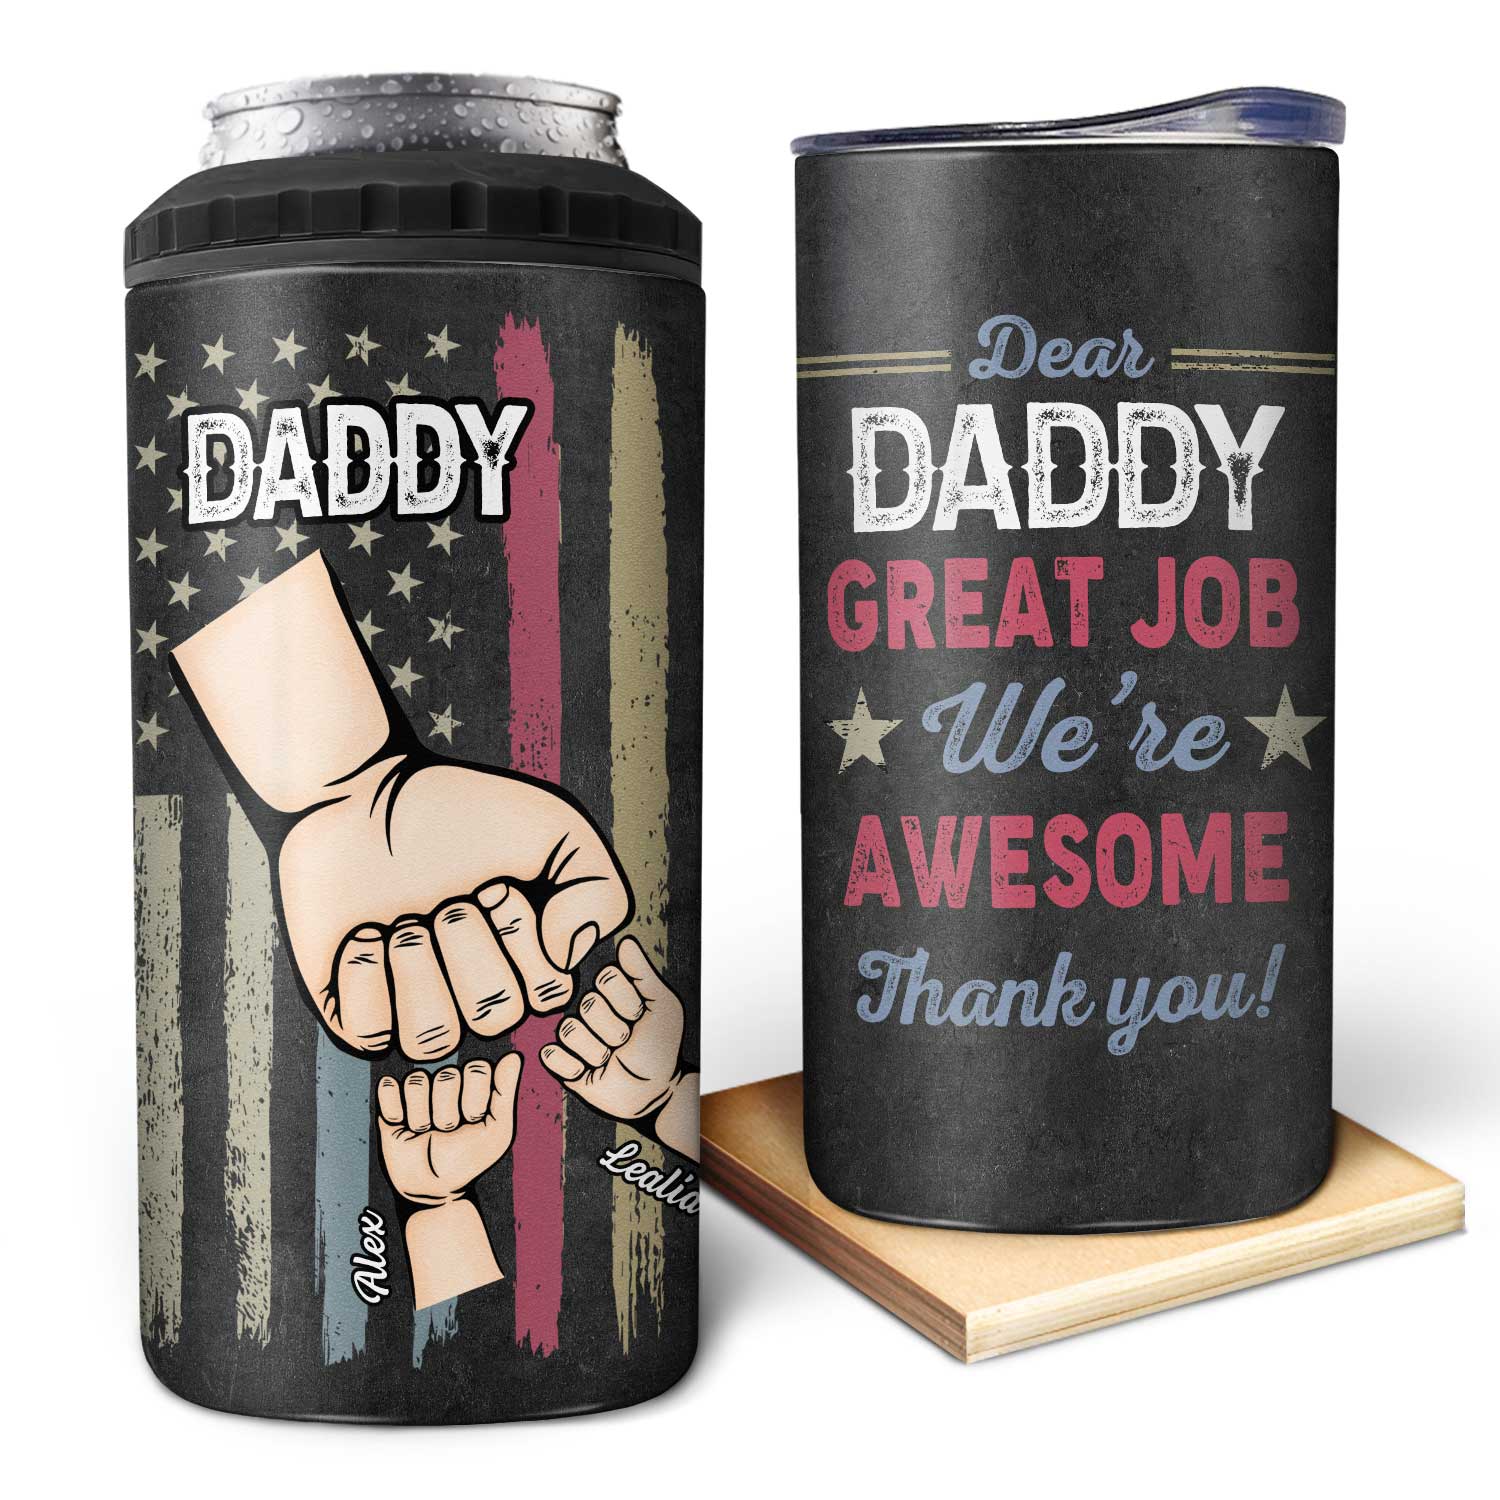 Dear Daddy Great Job Fist Bump - Birthday, Loving Gift For Dad, Father, Grandfather, Grandpa - Personalized Custom 4 In 1 Can Cooler Tumbler